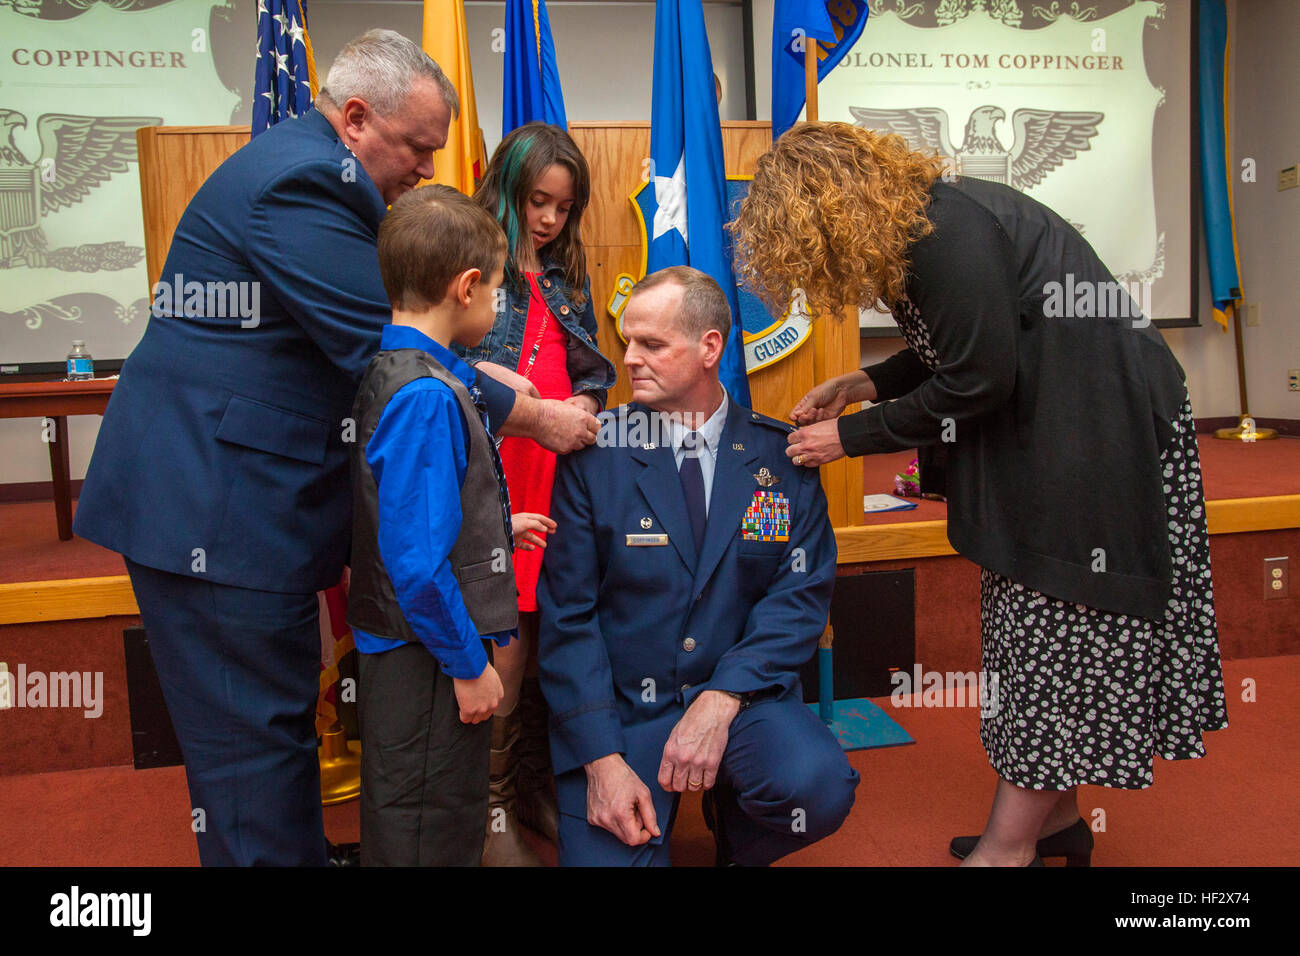 Brig. Gen. Michael L. Cunniff, left, the adjutant general of New Jersey, assists Lt. Col. Thomas P. Coppinger’s wife Alane, right, and their children, Aidan, second from left, and Melissa, in properly attaching the colonel’s eagles on their father’s epaulets during an Assumption of Command and promotion ceremony at Joint Base McGuire-Dix-Lakehurst, N.J., Feb. 8, 2015. The 108th Operations Group is part of the 108th Wing, New Jersey Air National Guard. (U.S. Air National Guard photo by Master Sgt. Mark C. Olsen/Released) Coppinger assumes command of Operations Group 150208-Z-AL508-041 Stock Photo